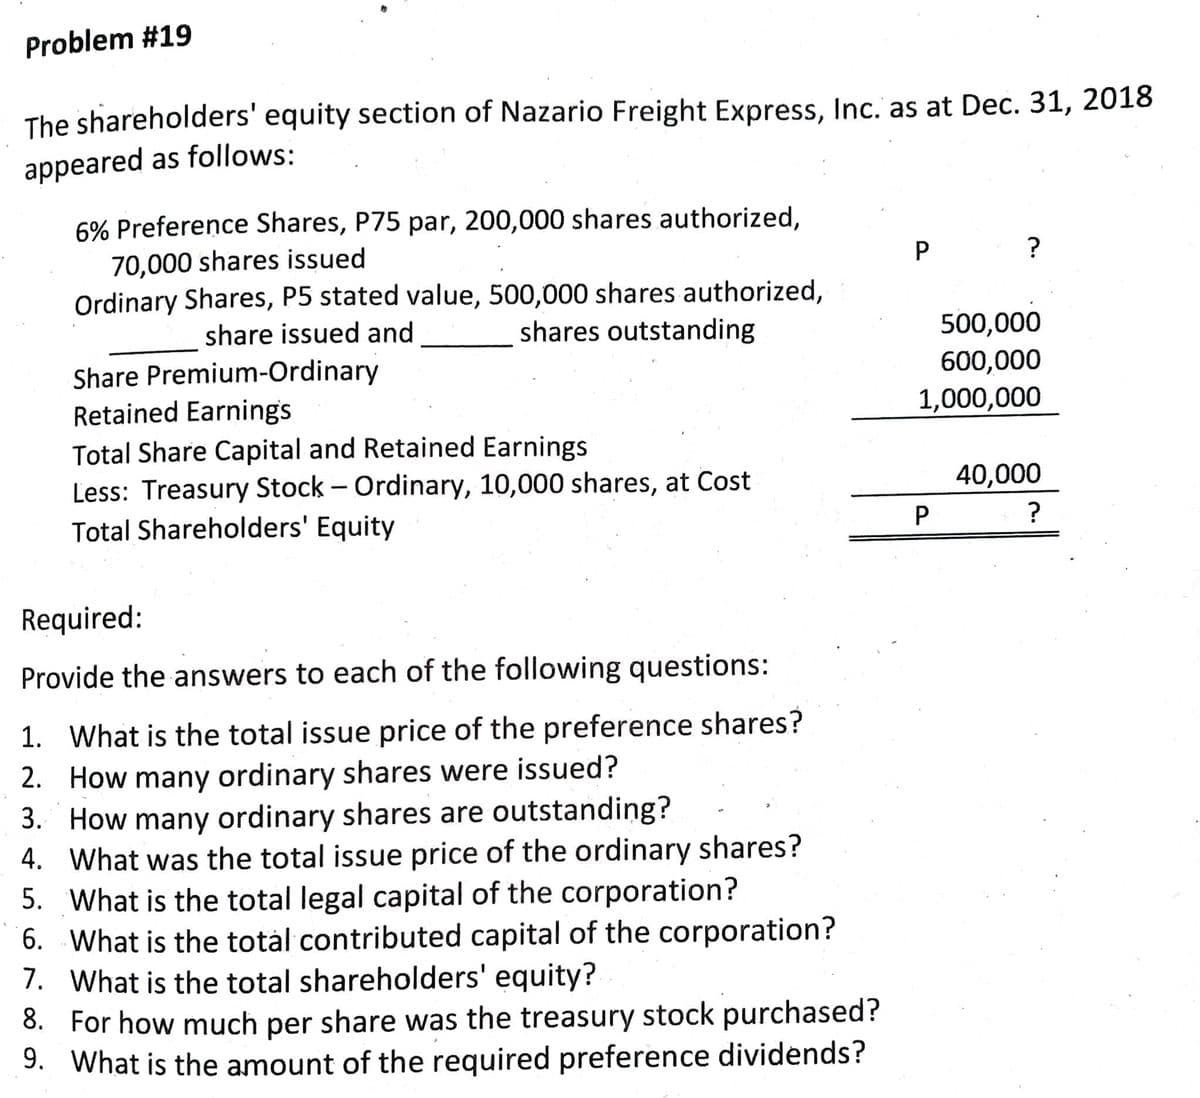 Problem #19
The shareholders' equity section of Nazario Freight Express, Inc. as at Dec. 31, 2018
appeared as follows:
6% Preference Shares, P75 par, 200,000 shares authorized,
70,000 shares issued
Ordinary Shares, P5 stated value, 500,000 shares authorized,
share issued and
shares outstanding
500,000
Share Premium-Ordinary
Retained Earnings
Total Share Capital and Retained Earnings
Less: Treasury Stock - Ordinary, 10,000 shares, at Cost
Total Shareholders' Equity
600,000
1,000,000
40,000
P
Required:
Provide the answers to each of the following questions:
1. What is the total issue price of the preference shares?
2. How many ordinary shares were issued?
3. How many ordinary shares are outstanding?
4. What was the total issue price of the ordinary shares?
5. What is the total legal capital of the corporation?
6. What is the totál contributed capital of the corporation?
7. What is the total shareholders' equity?
8. For how much per share was the treasury stock purchased?
9. What is the amount of the required preference dividends?
